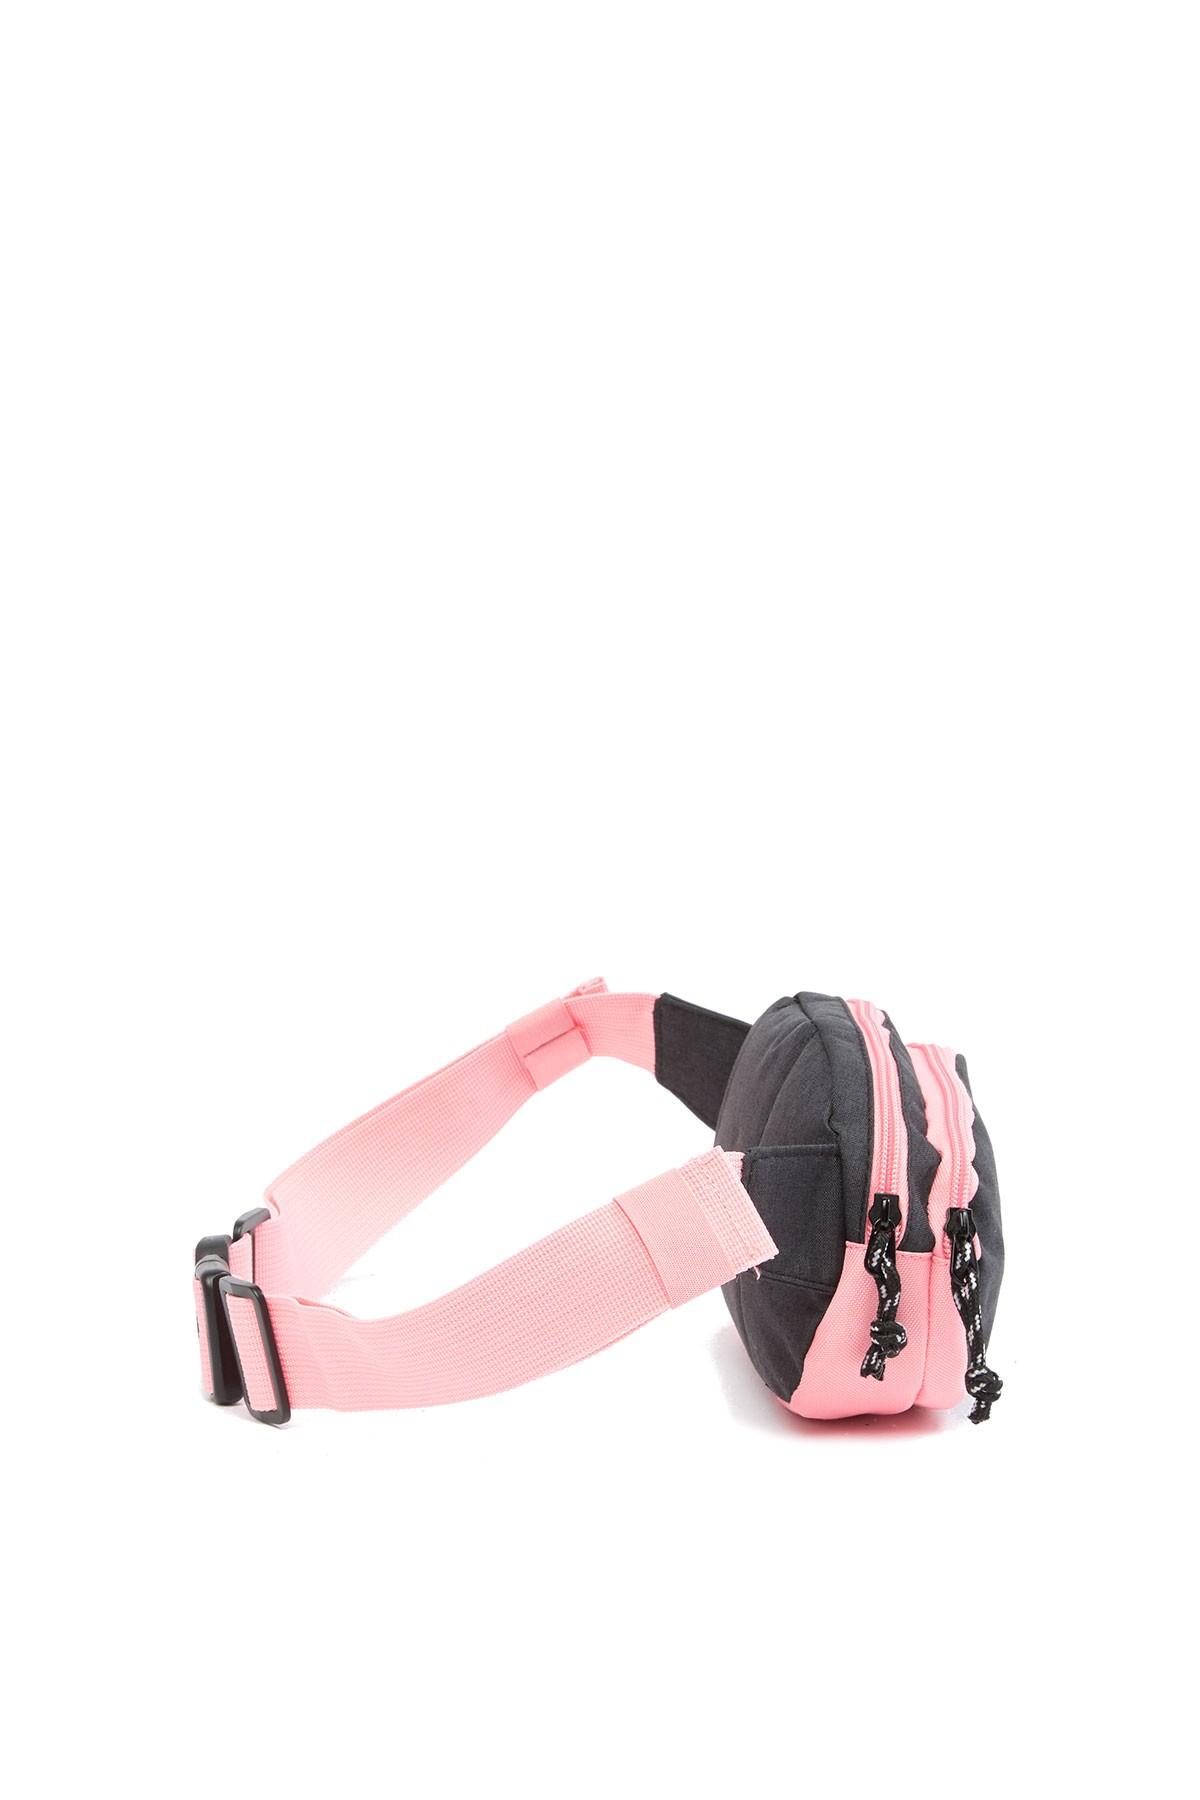 forever champ signal fanny pack